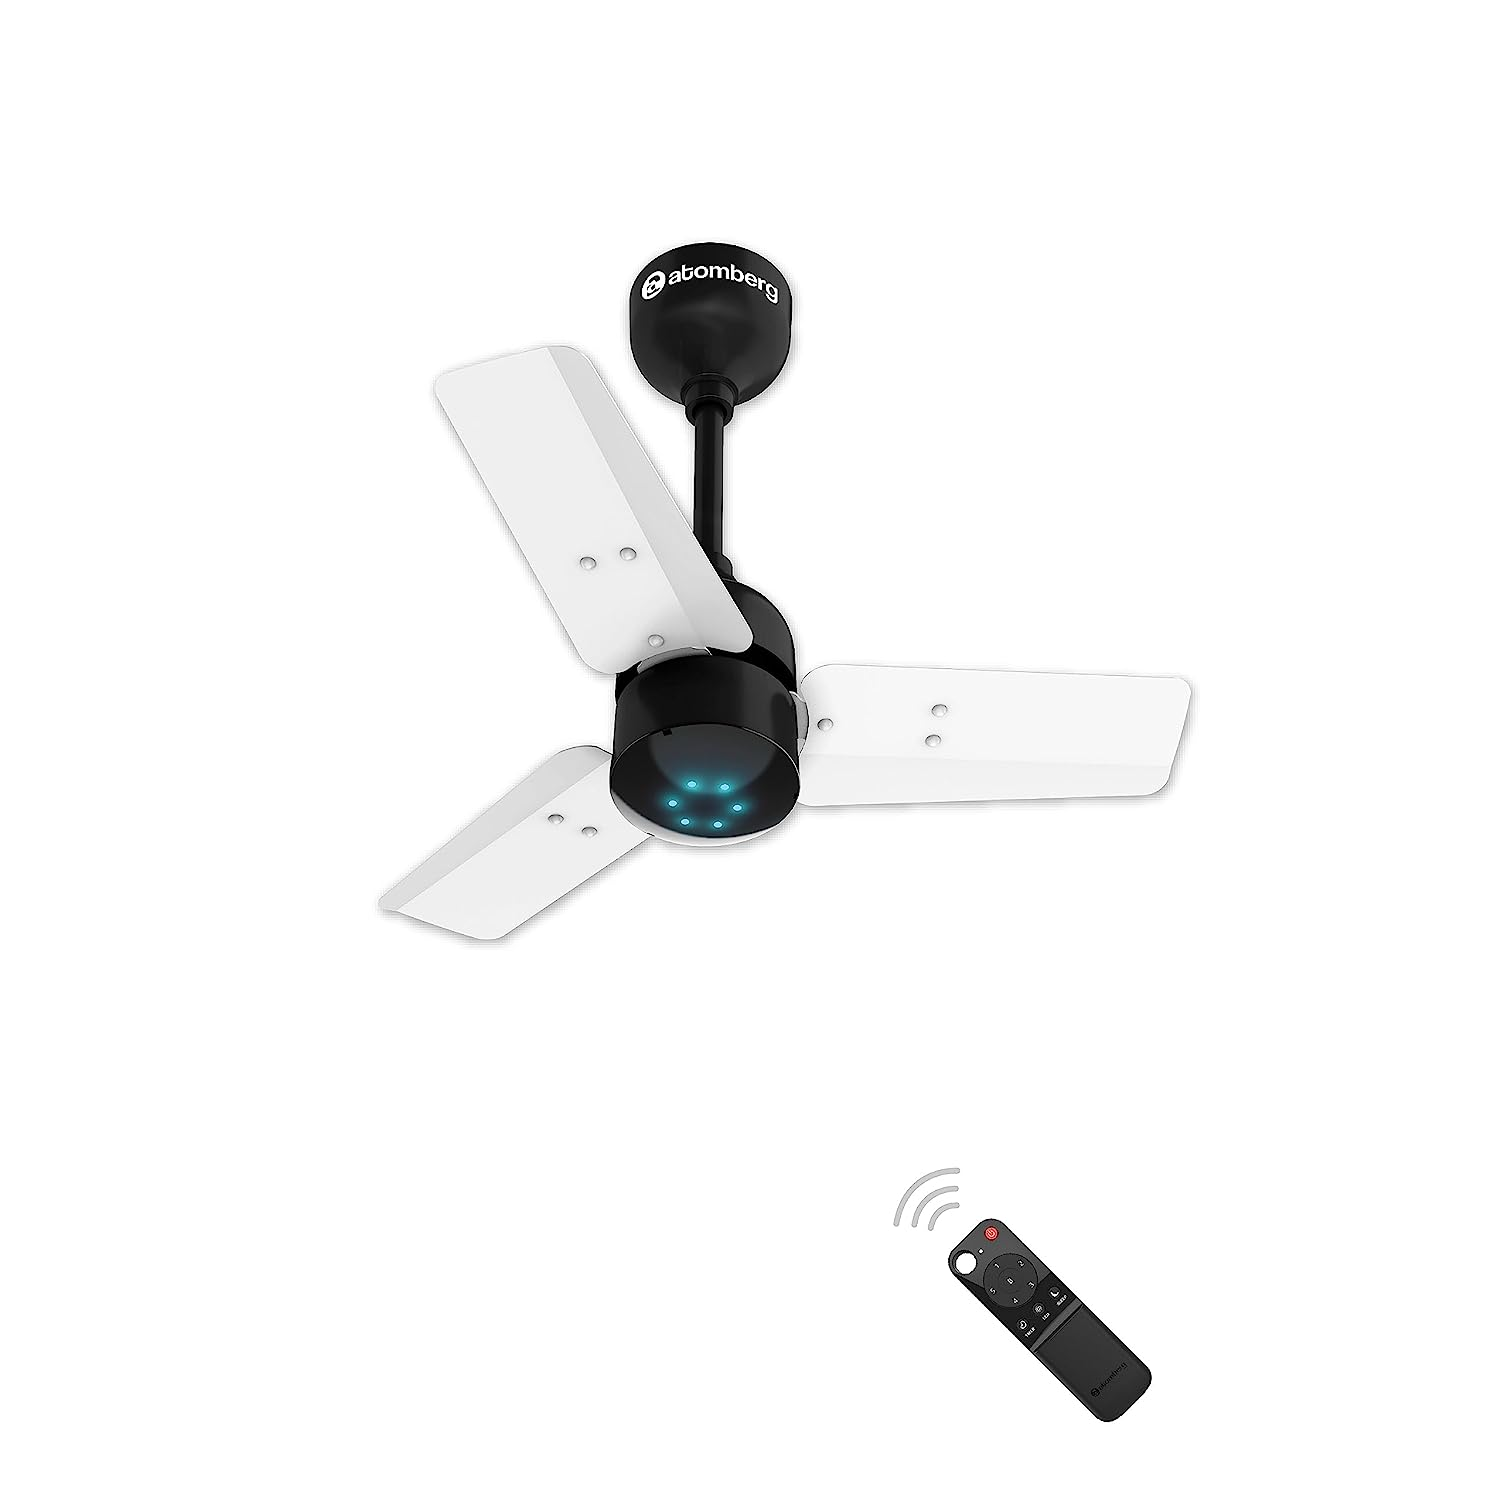 atomberg Renesa 600mm BLDC Motor  Ceiling Fans with Remote Control  3 Year Warranty (White )